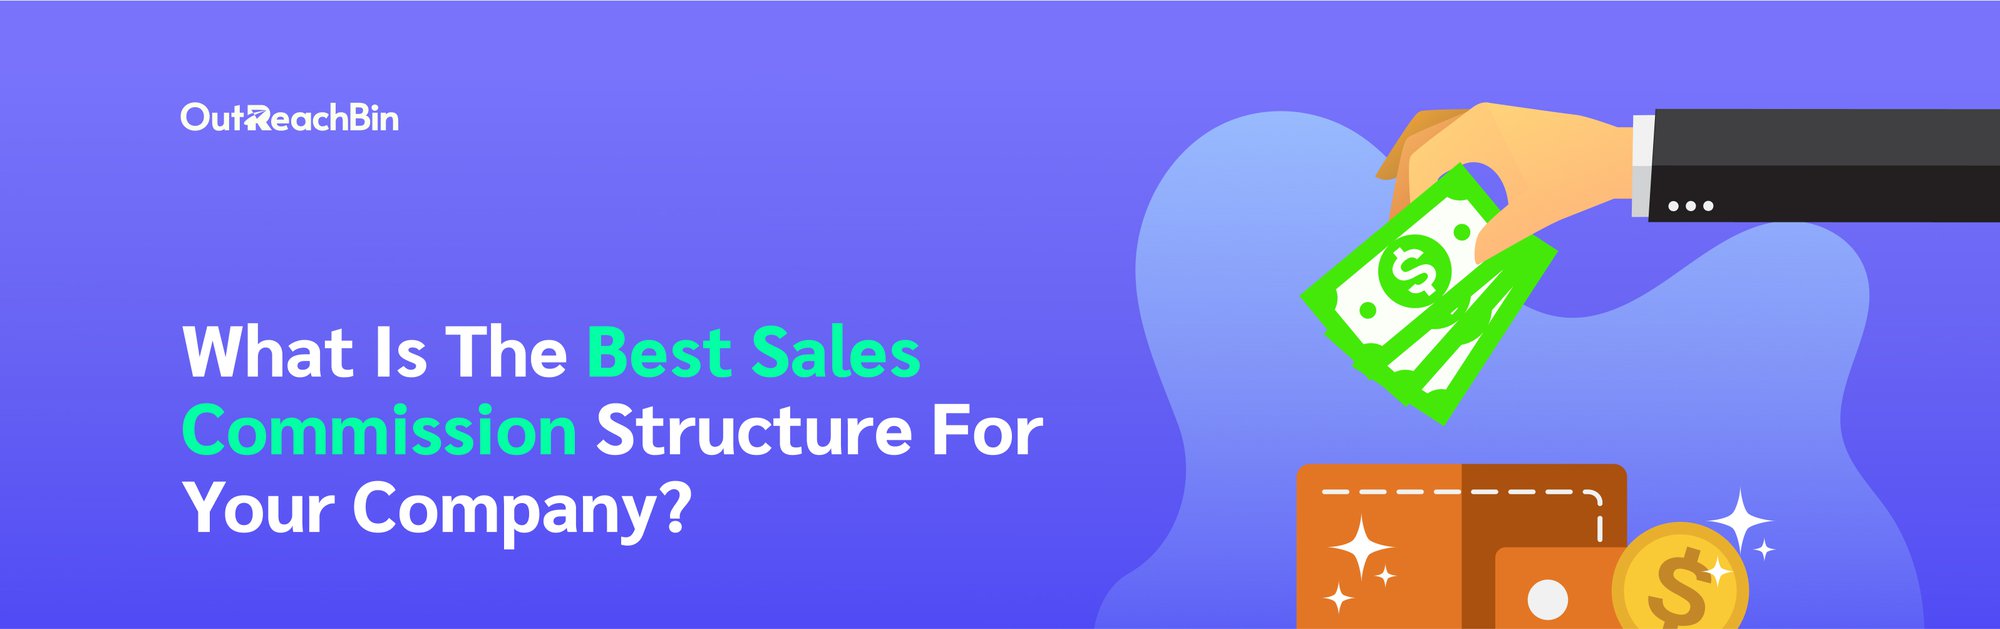 What Is The Best Sales Commission Structure For Your Company?